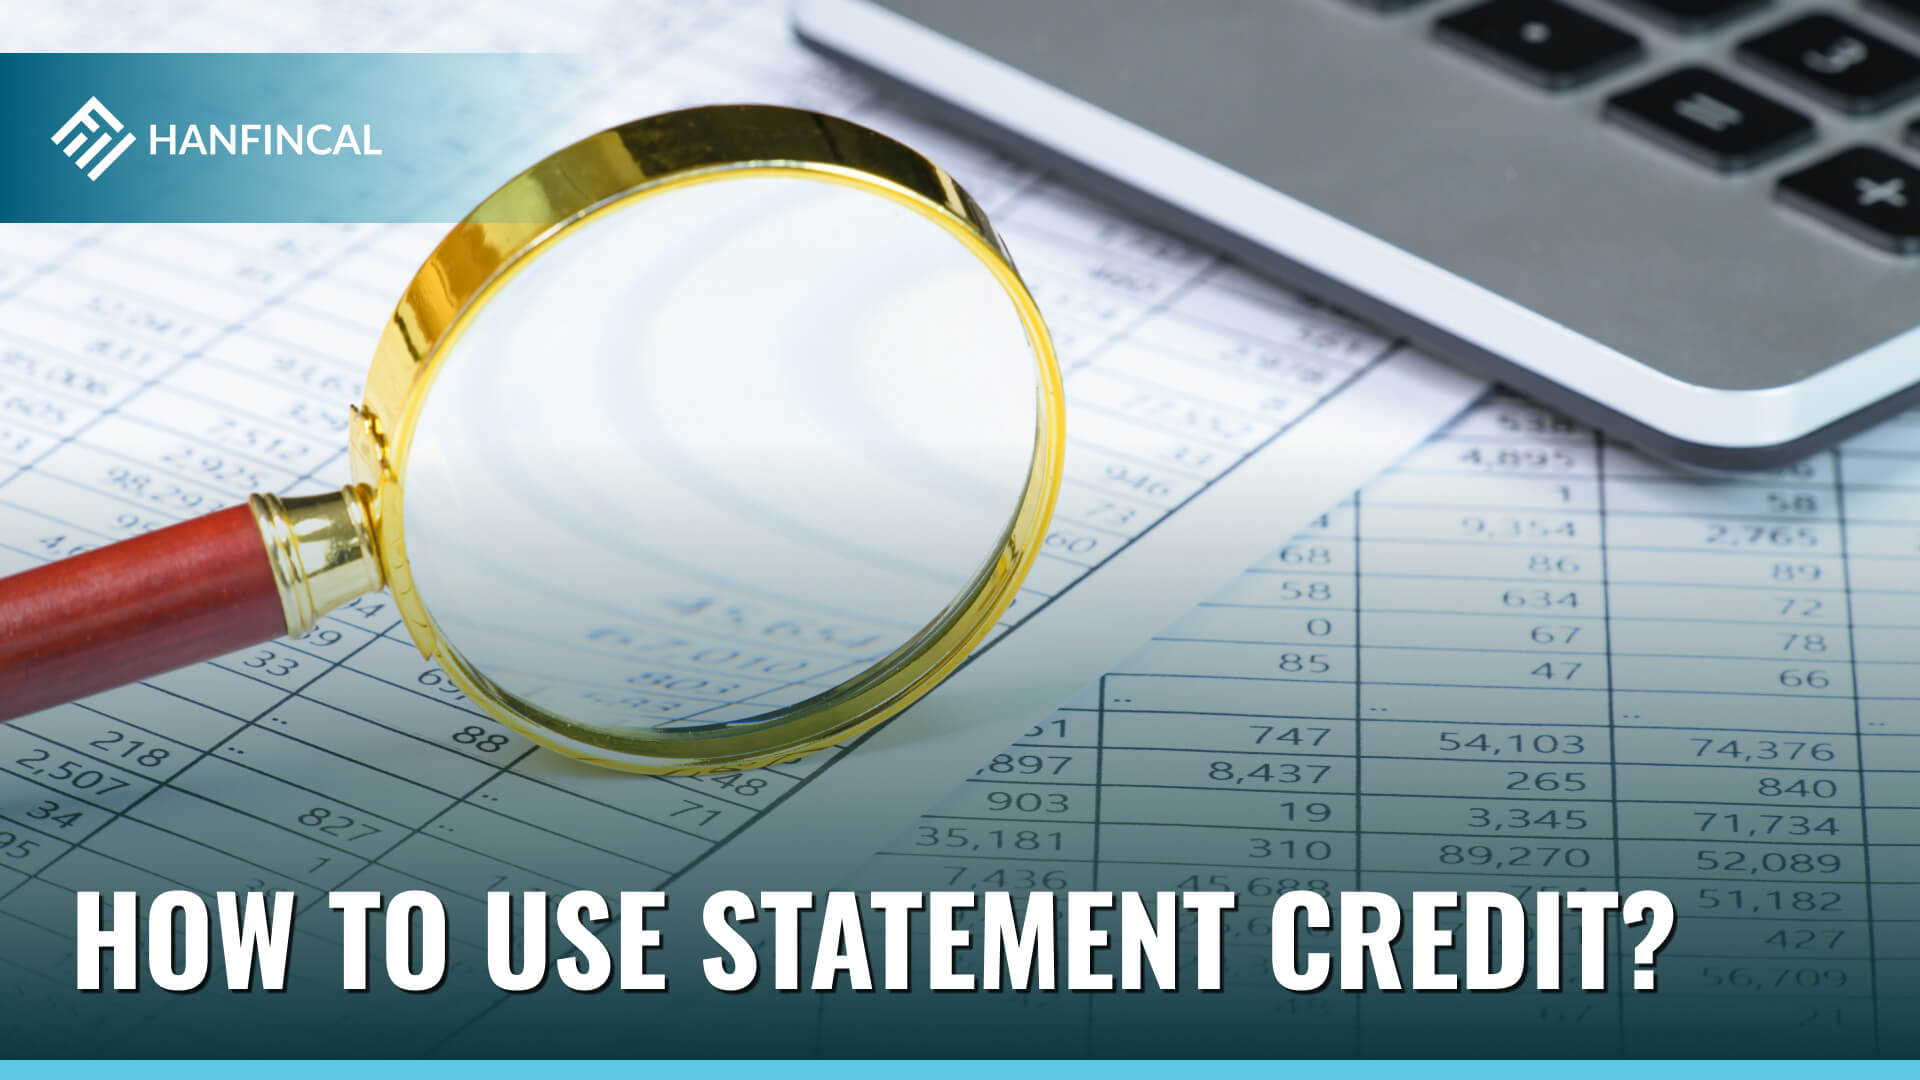 How to use statement credit?